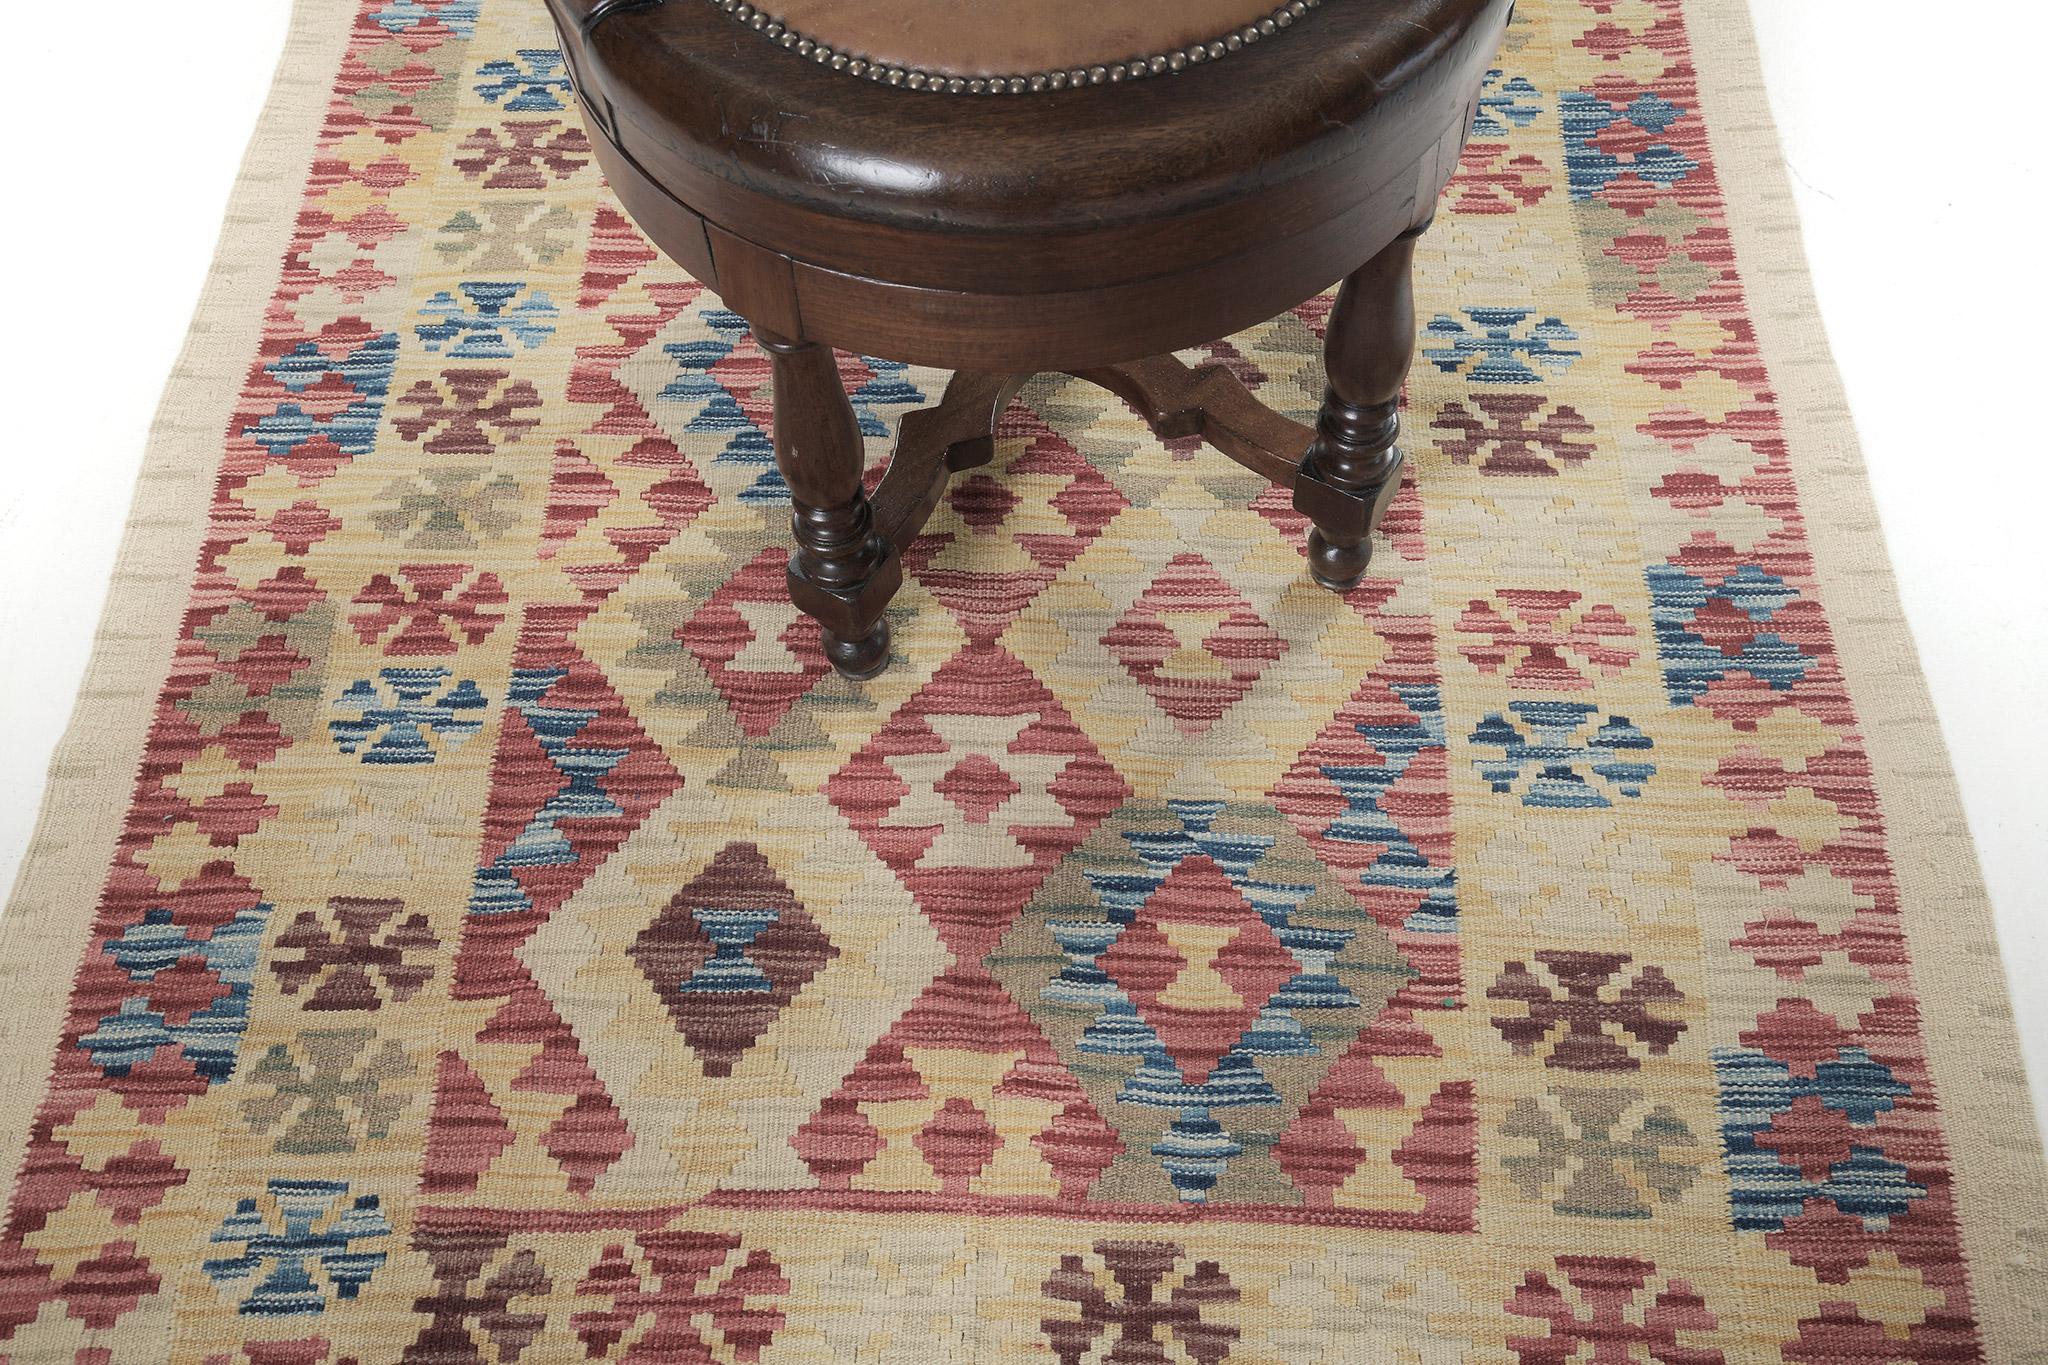 Vintage-styled flatweaves are made up of some of the promising wool and weaved incredibly to create charming textures. This naturally dyed Kilim is a banded flat weave with alternating enthusiastic colors in red, maroon, blue, and yellow. This piece